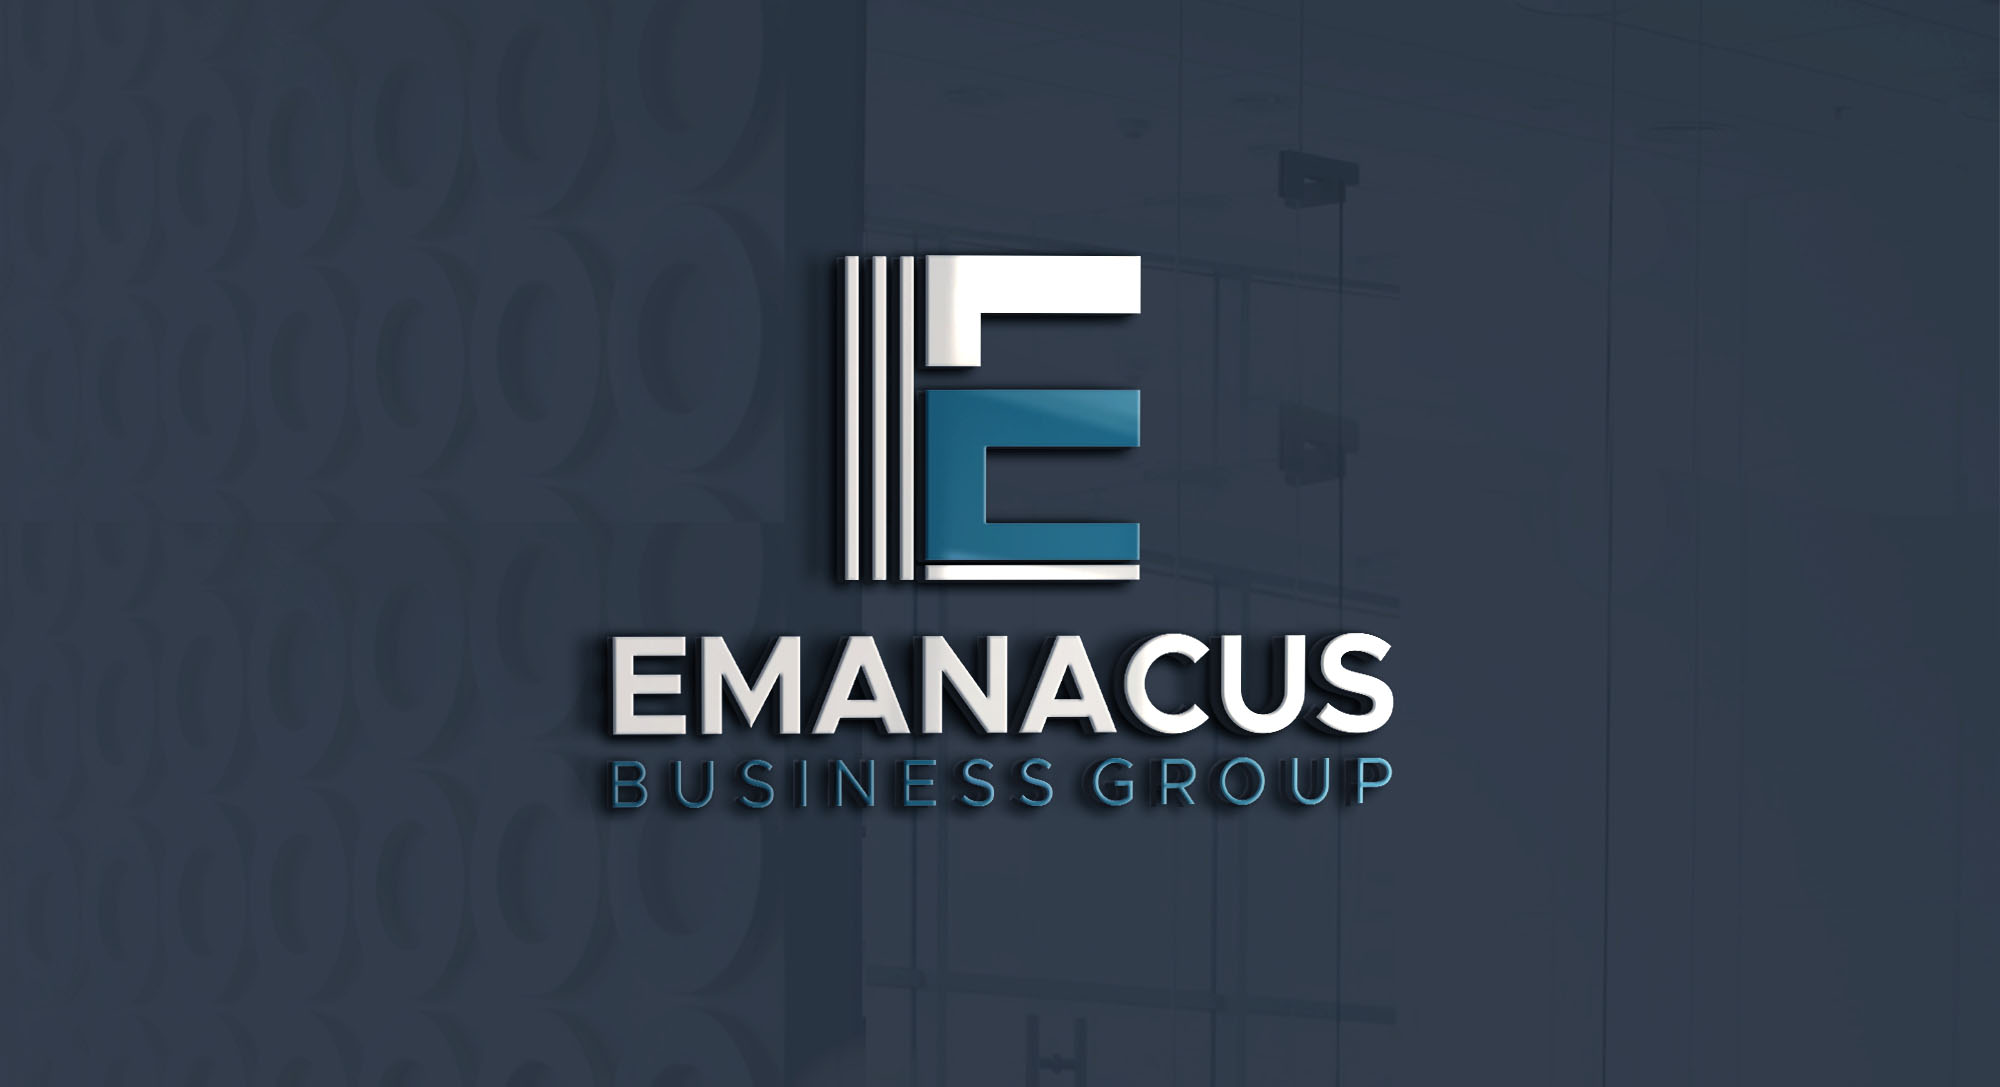 Emanacus Business Group